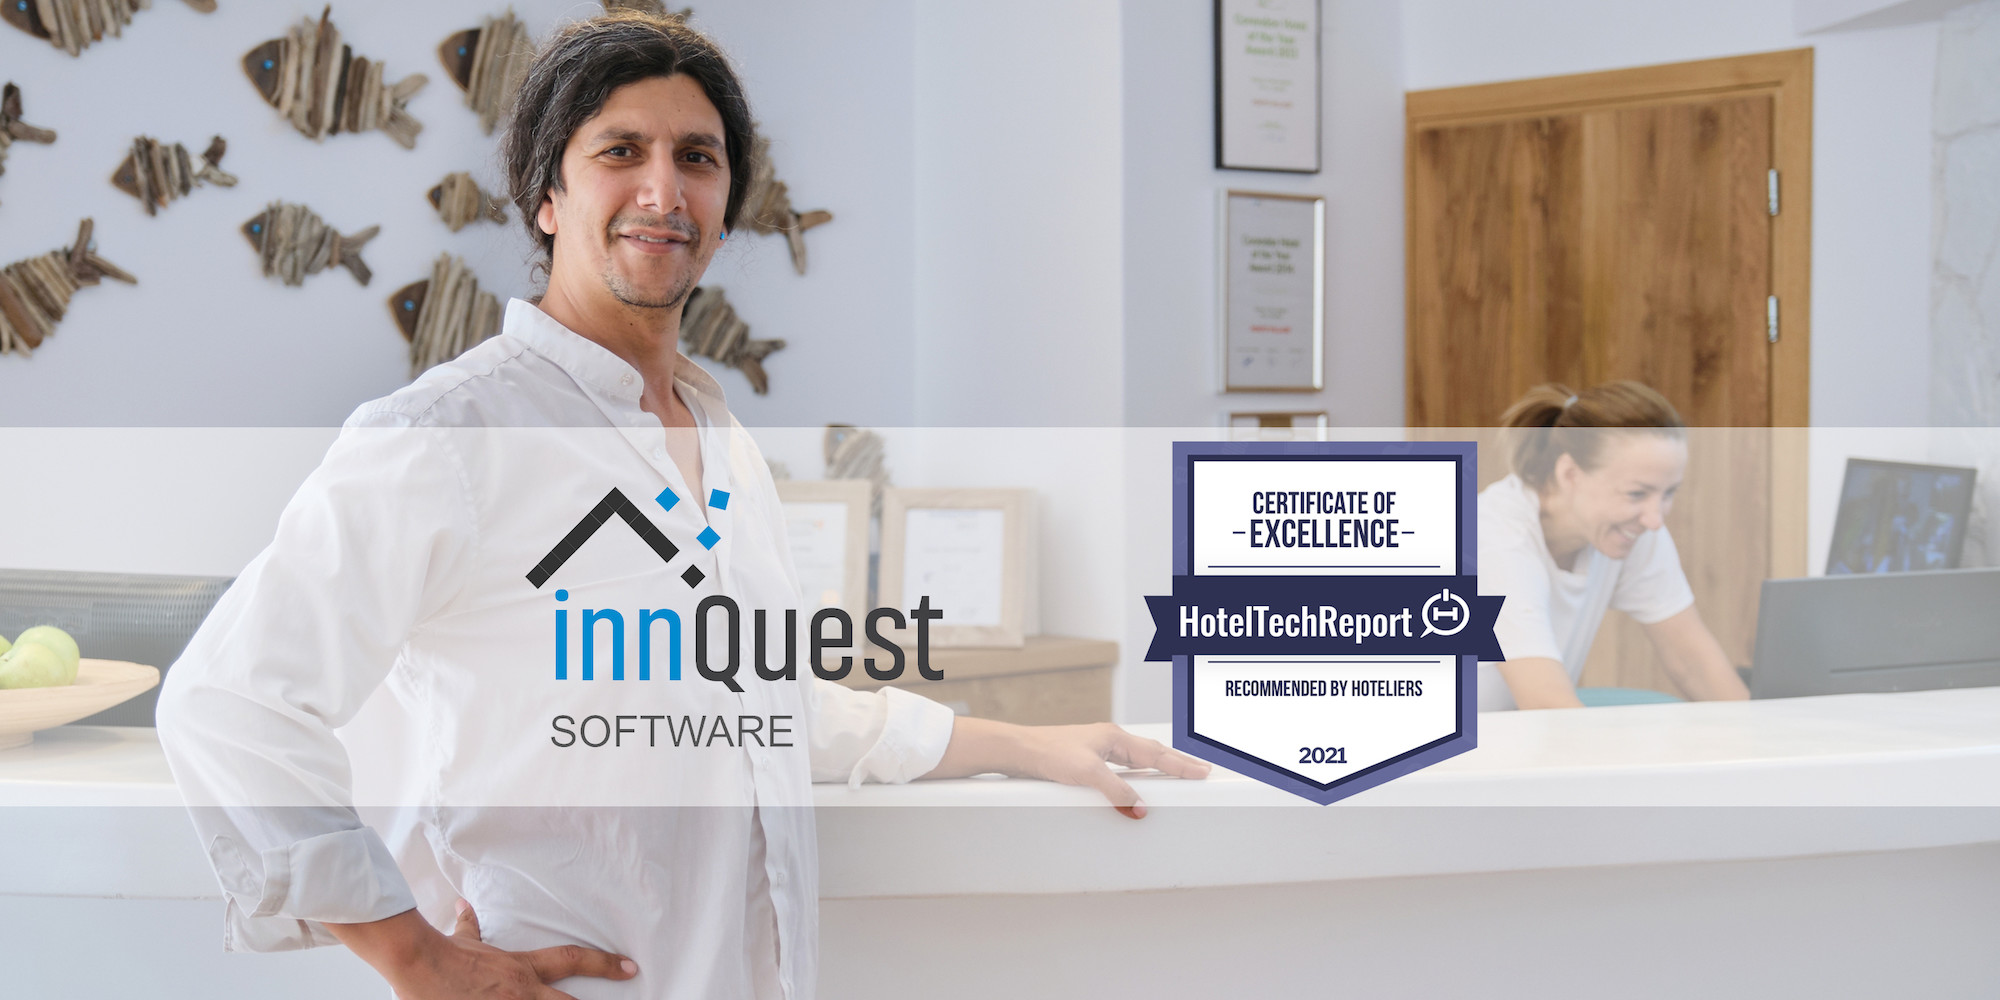 InnQuest Software earns Certification of Excellence from Hotel Tech Report